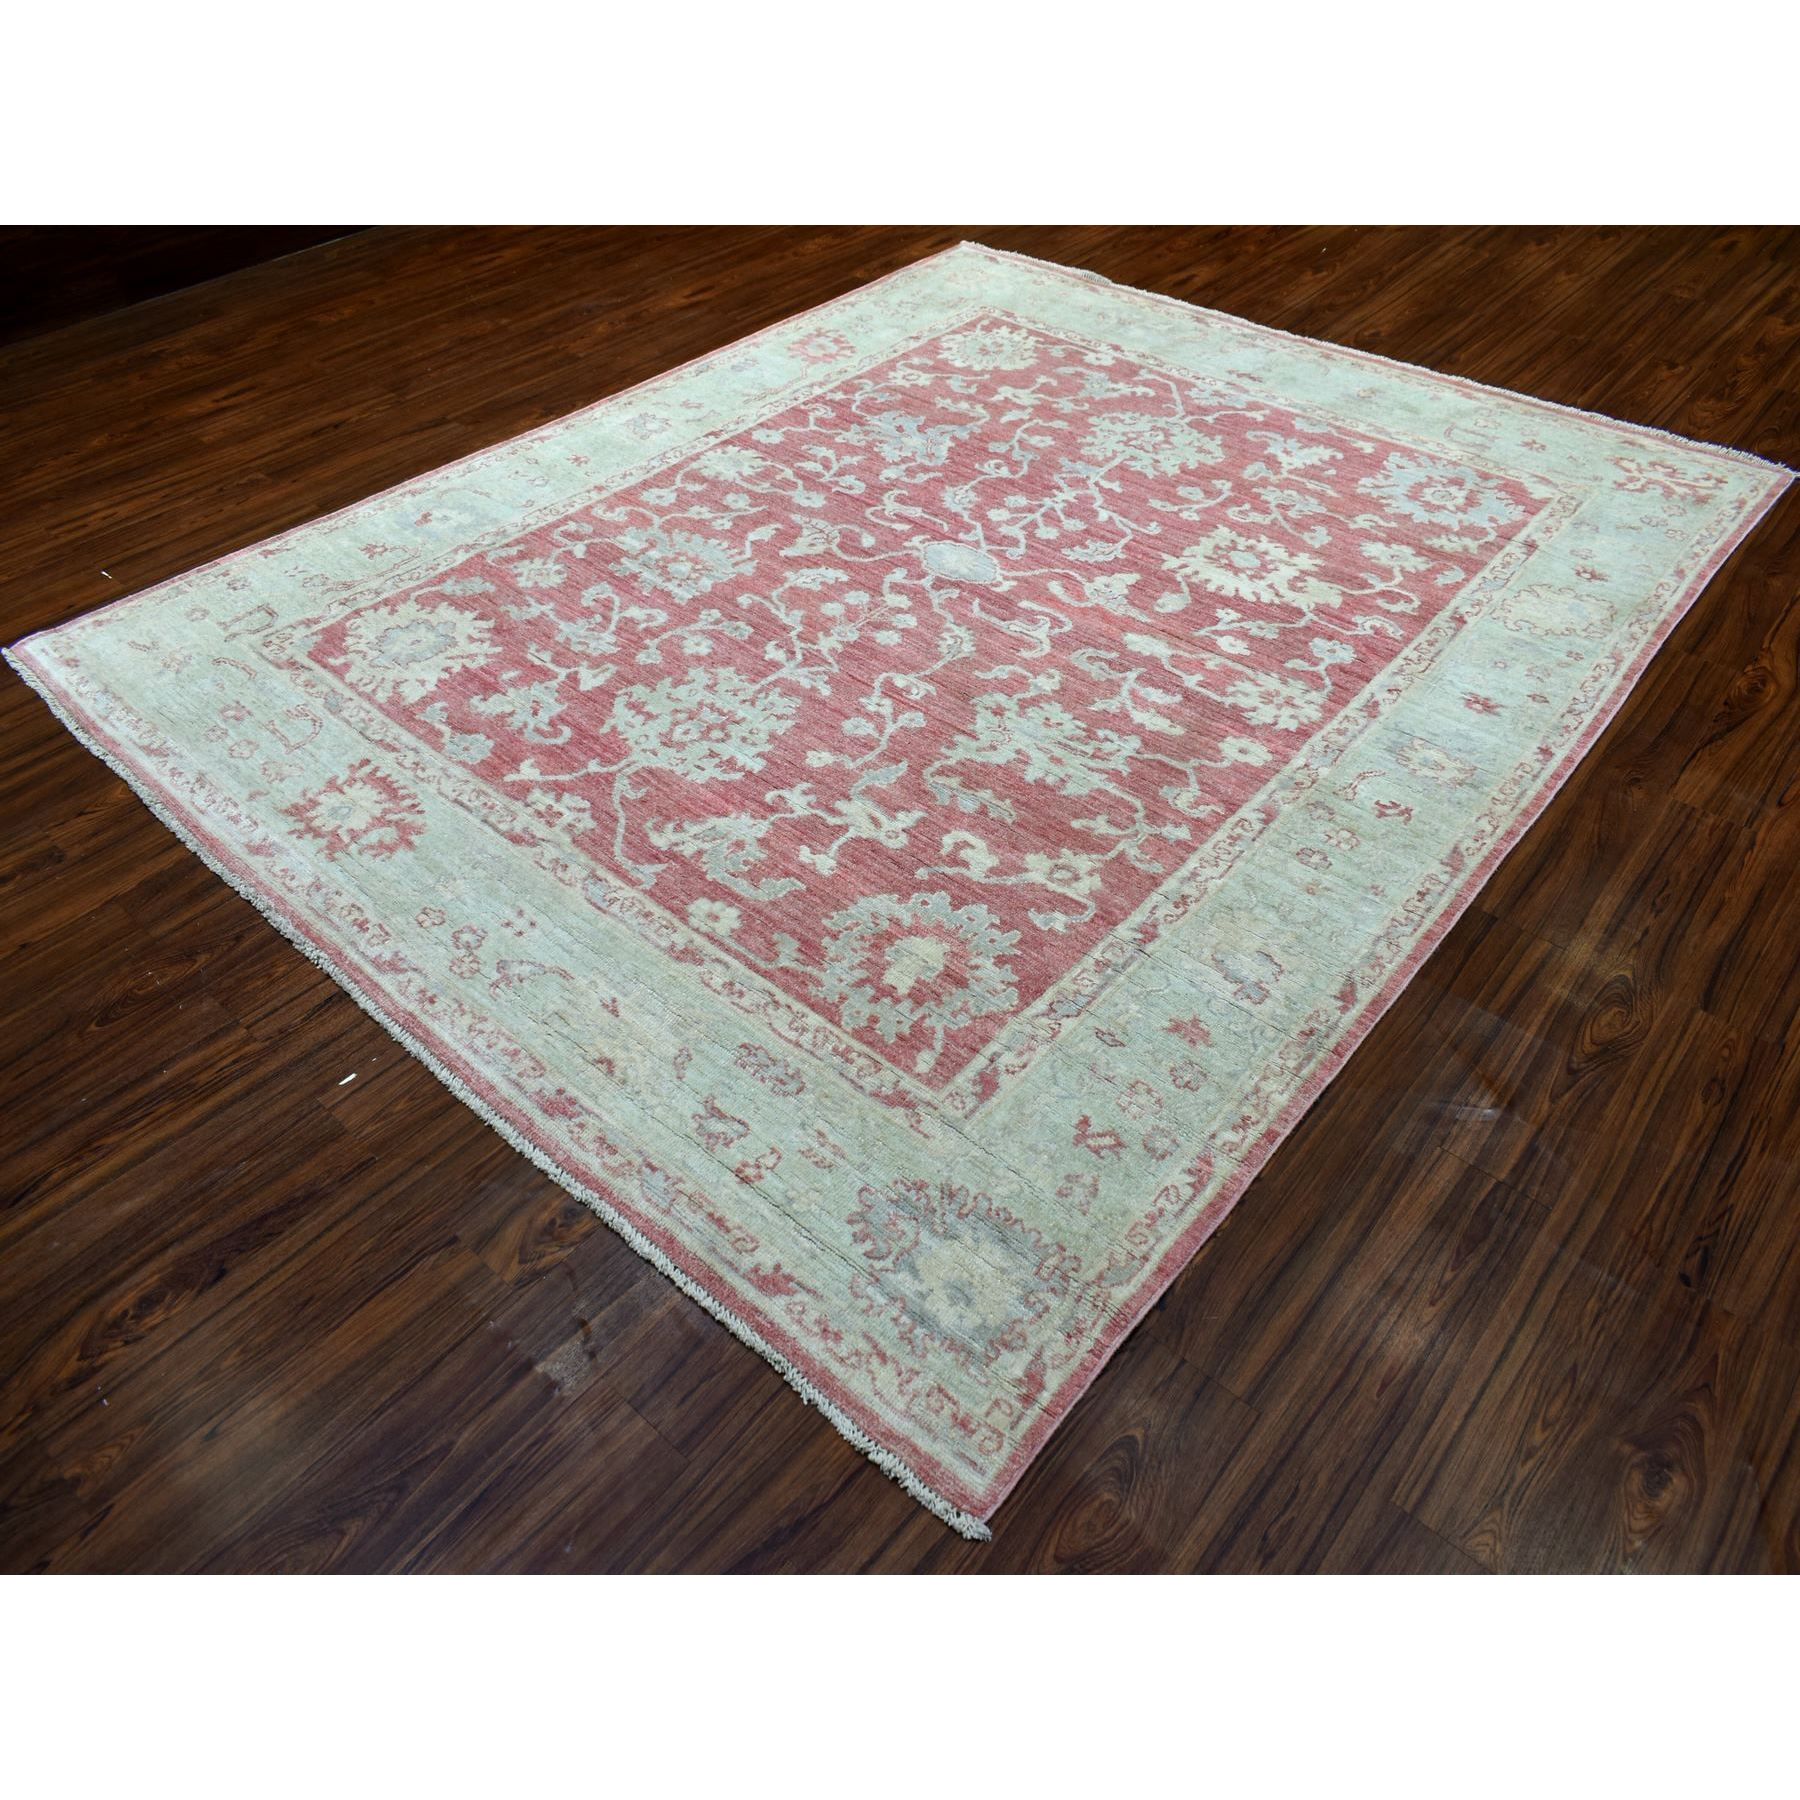 8'2"x9'9" Angora Ushak with Floral Eye Catching Pattern Natural Wool Hand Woven Coral Pink Oriental Rug 